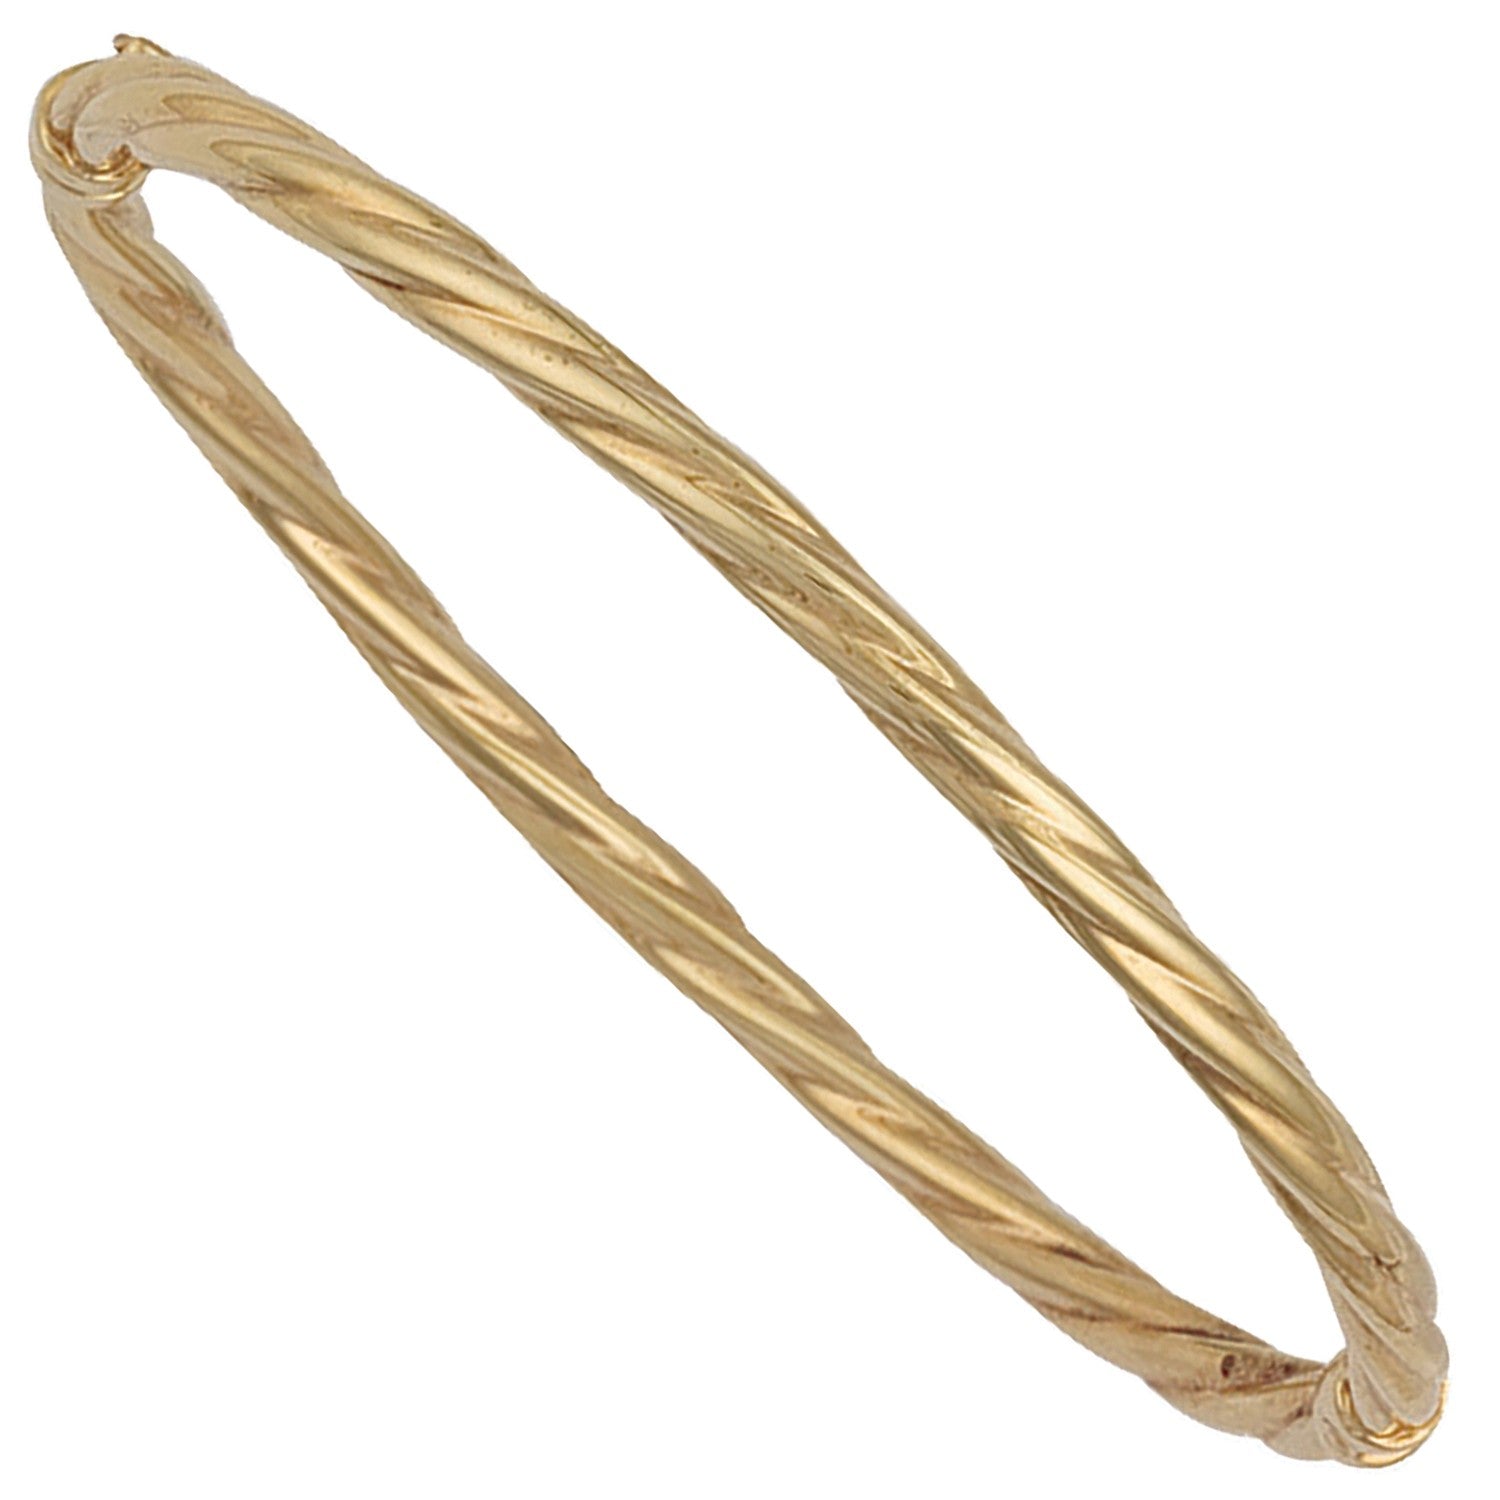 9ct Yellow Gold Twisted Bangle 3.7mm - FJewellery